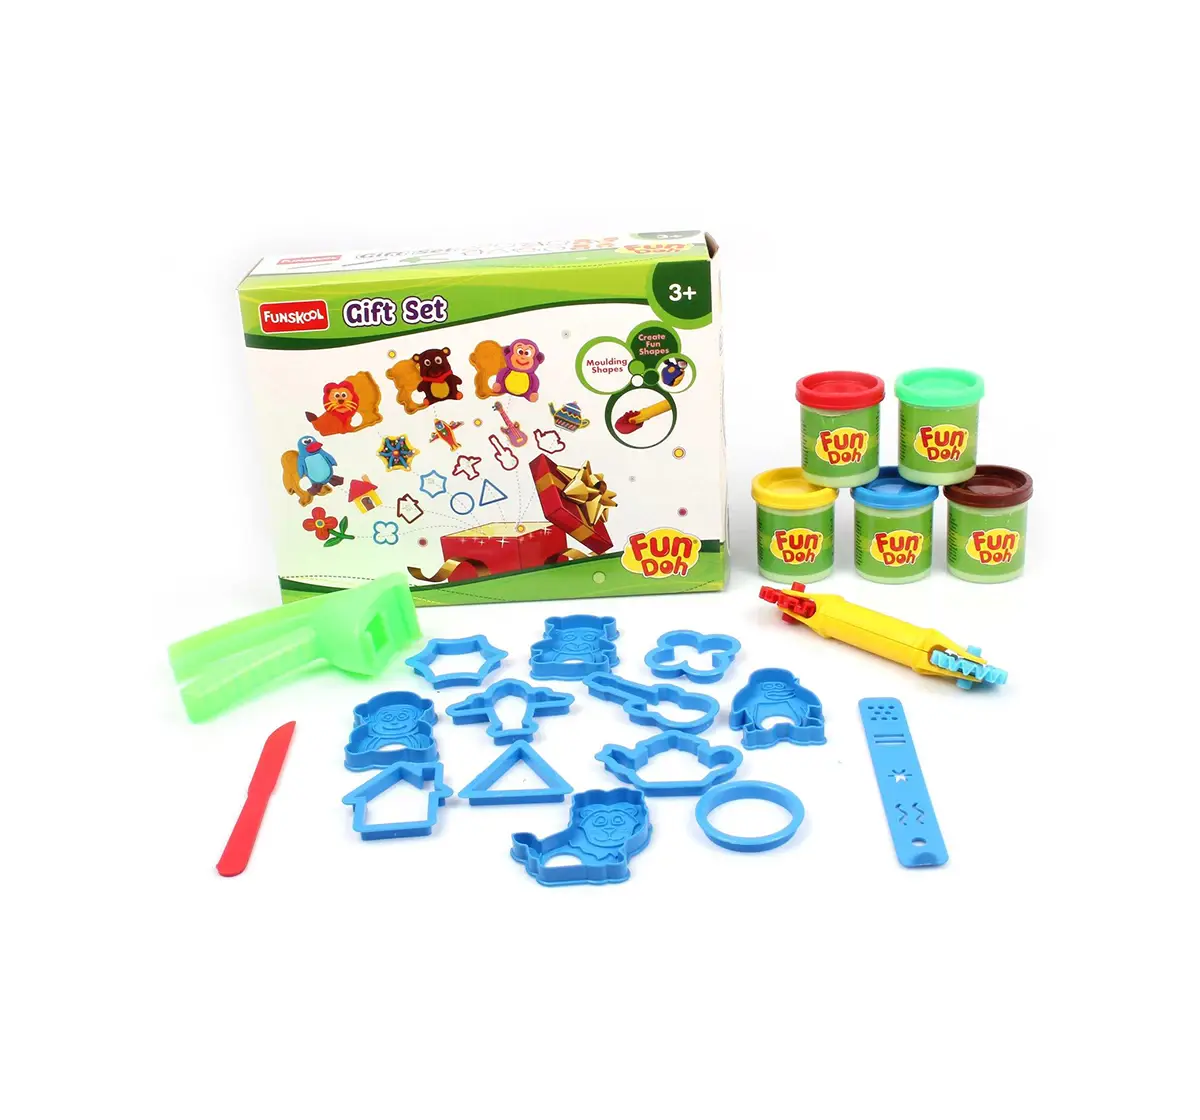 Buy Funskool Fundough Gift Set Online at Best Price in India – FunCorp India